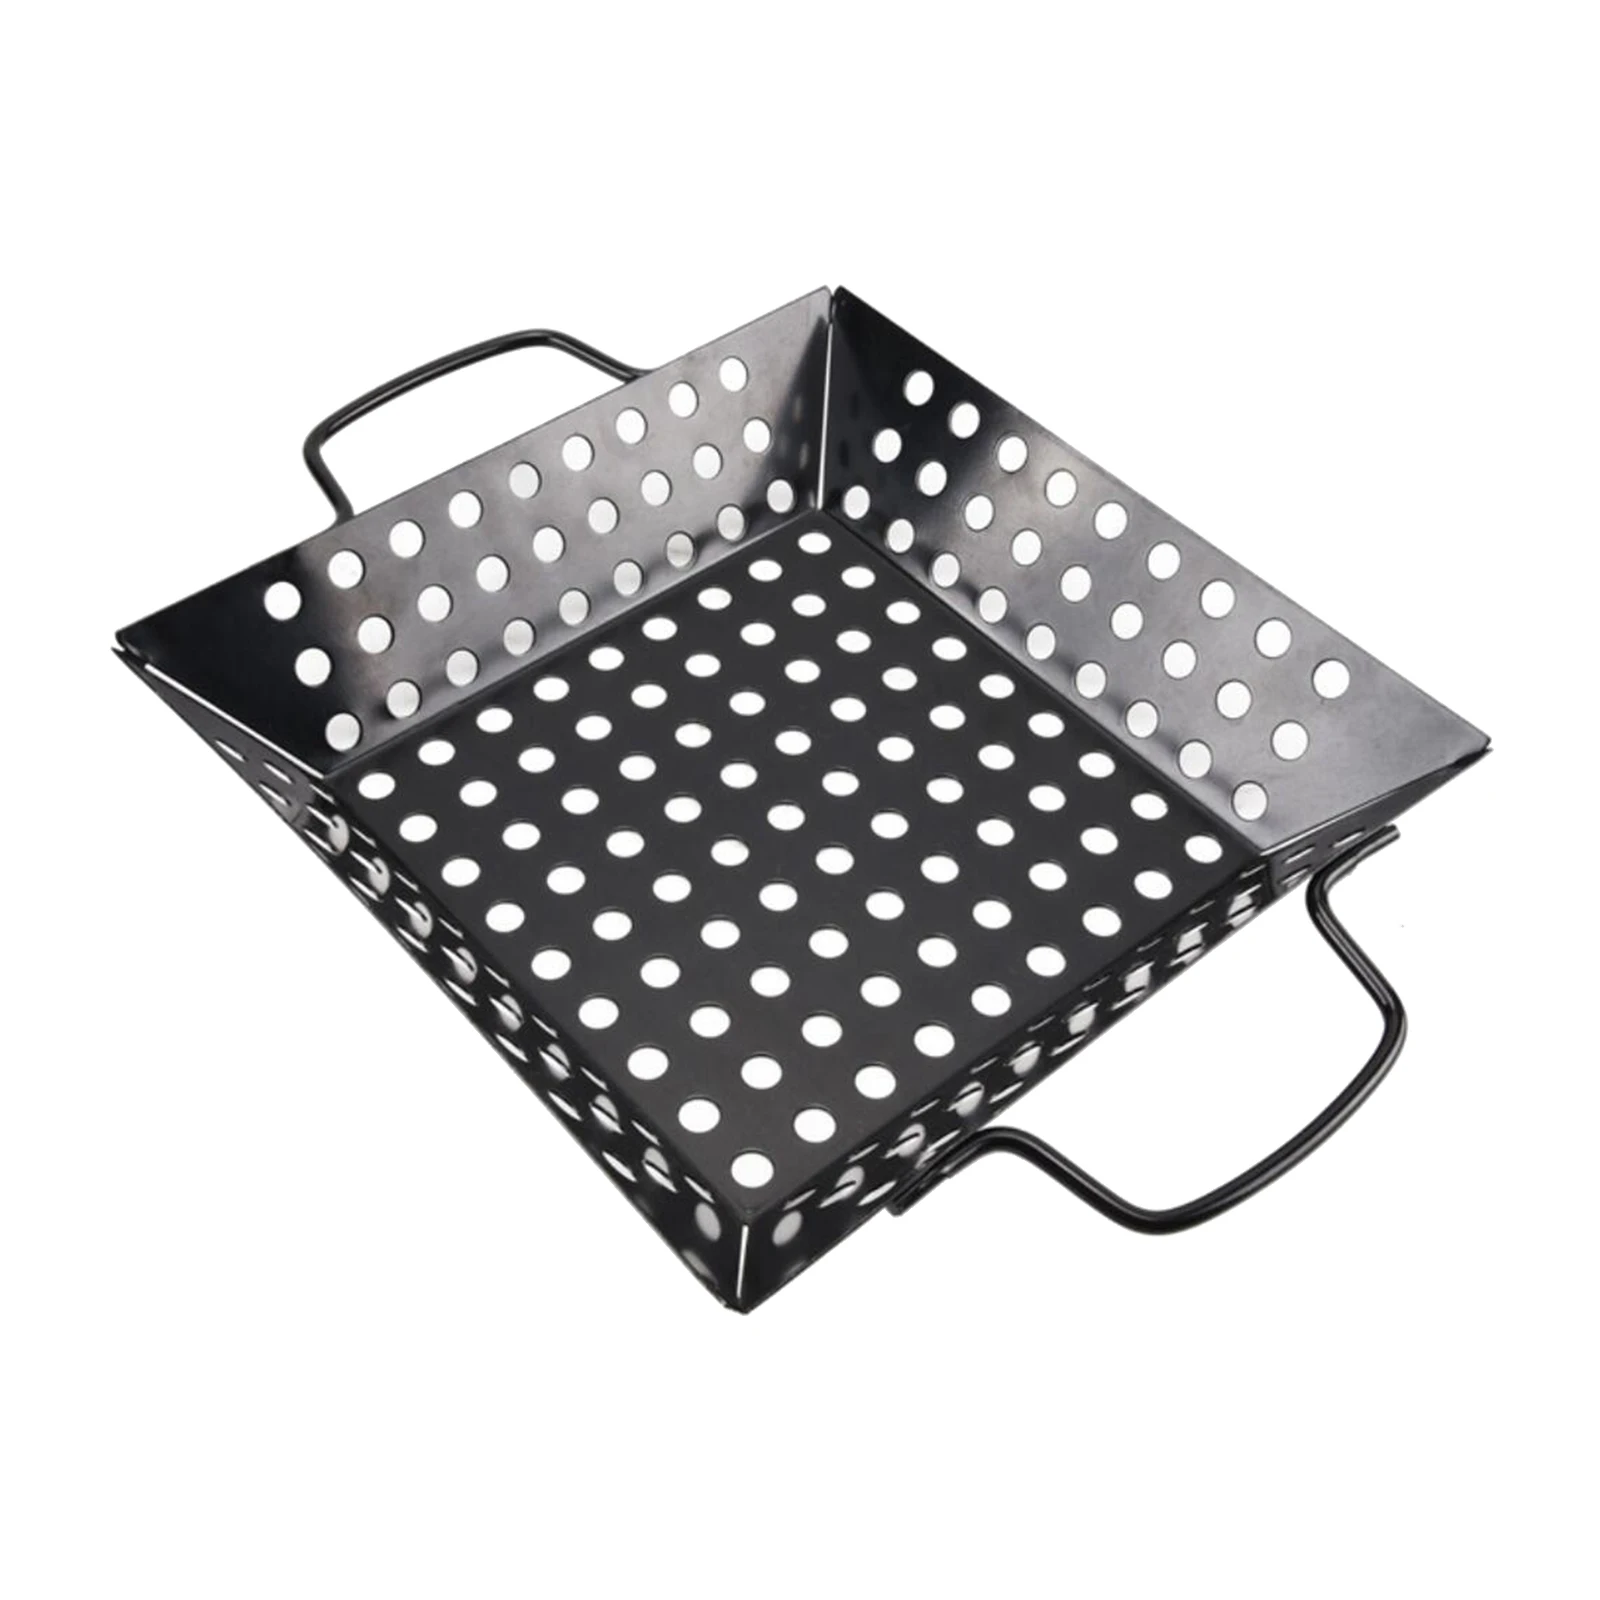 Grill Topper BBQ Grilling Pans Non-Stick Carbon Steel Barbecue Trays for Cooking Meat, Vegetables, Easy to Clean